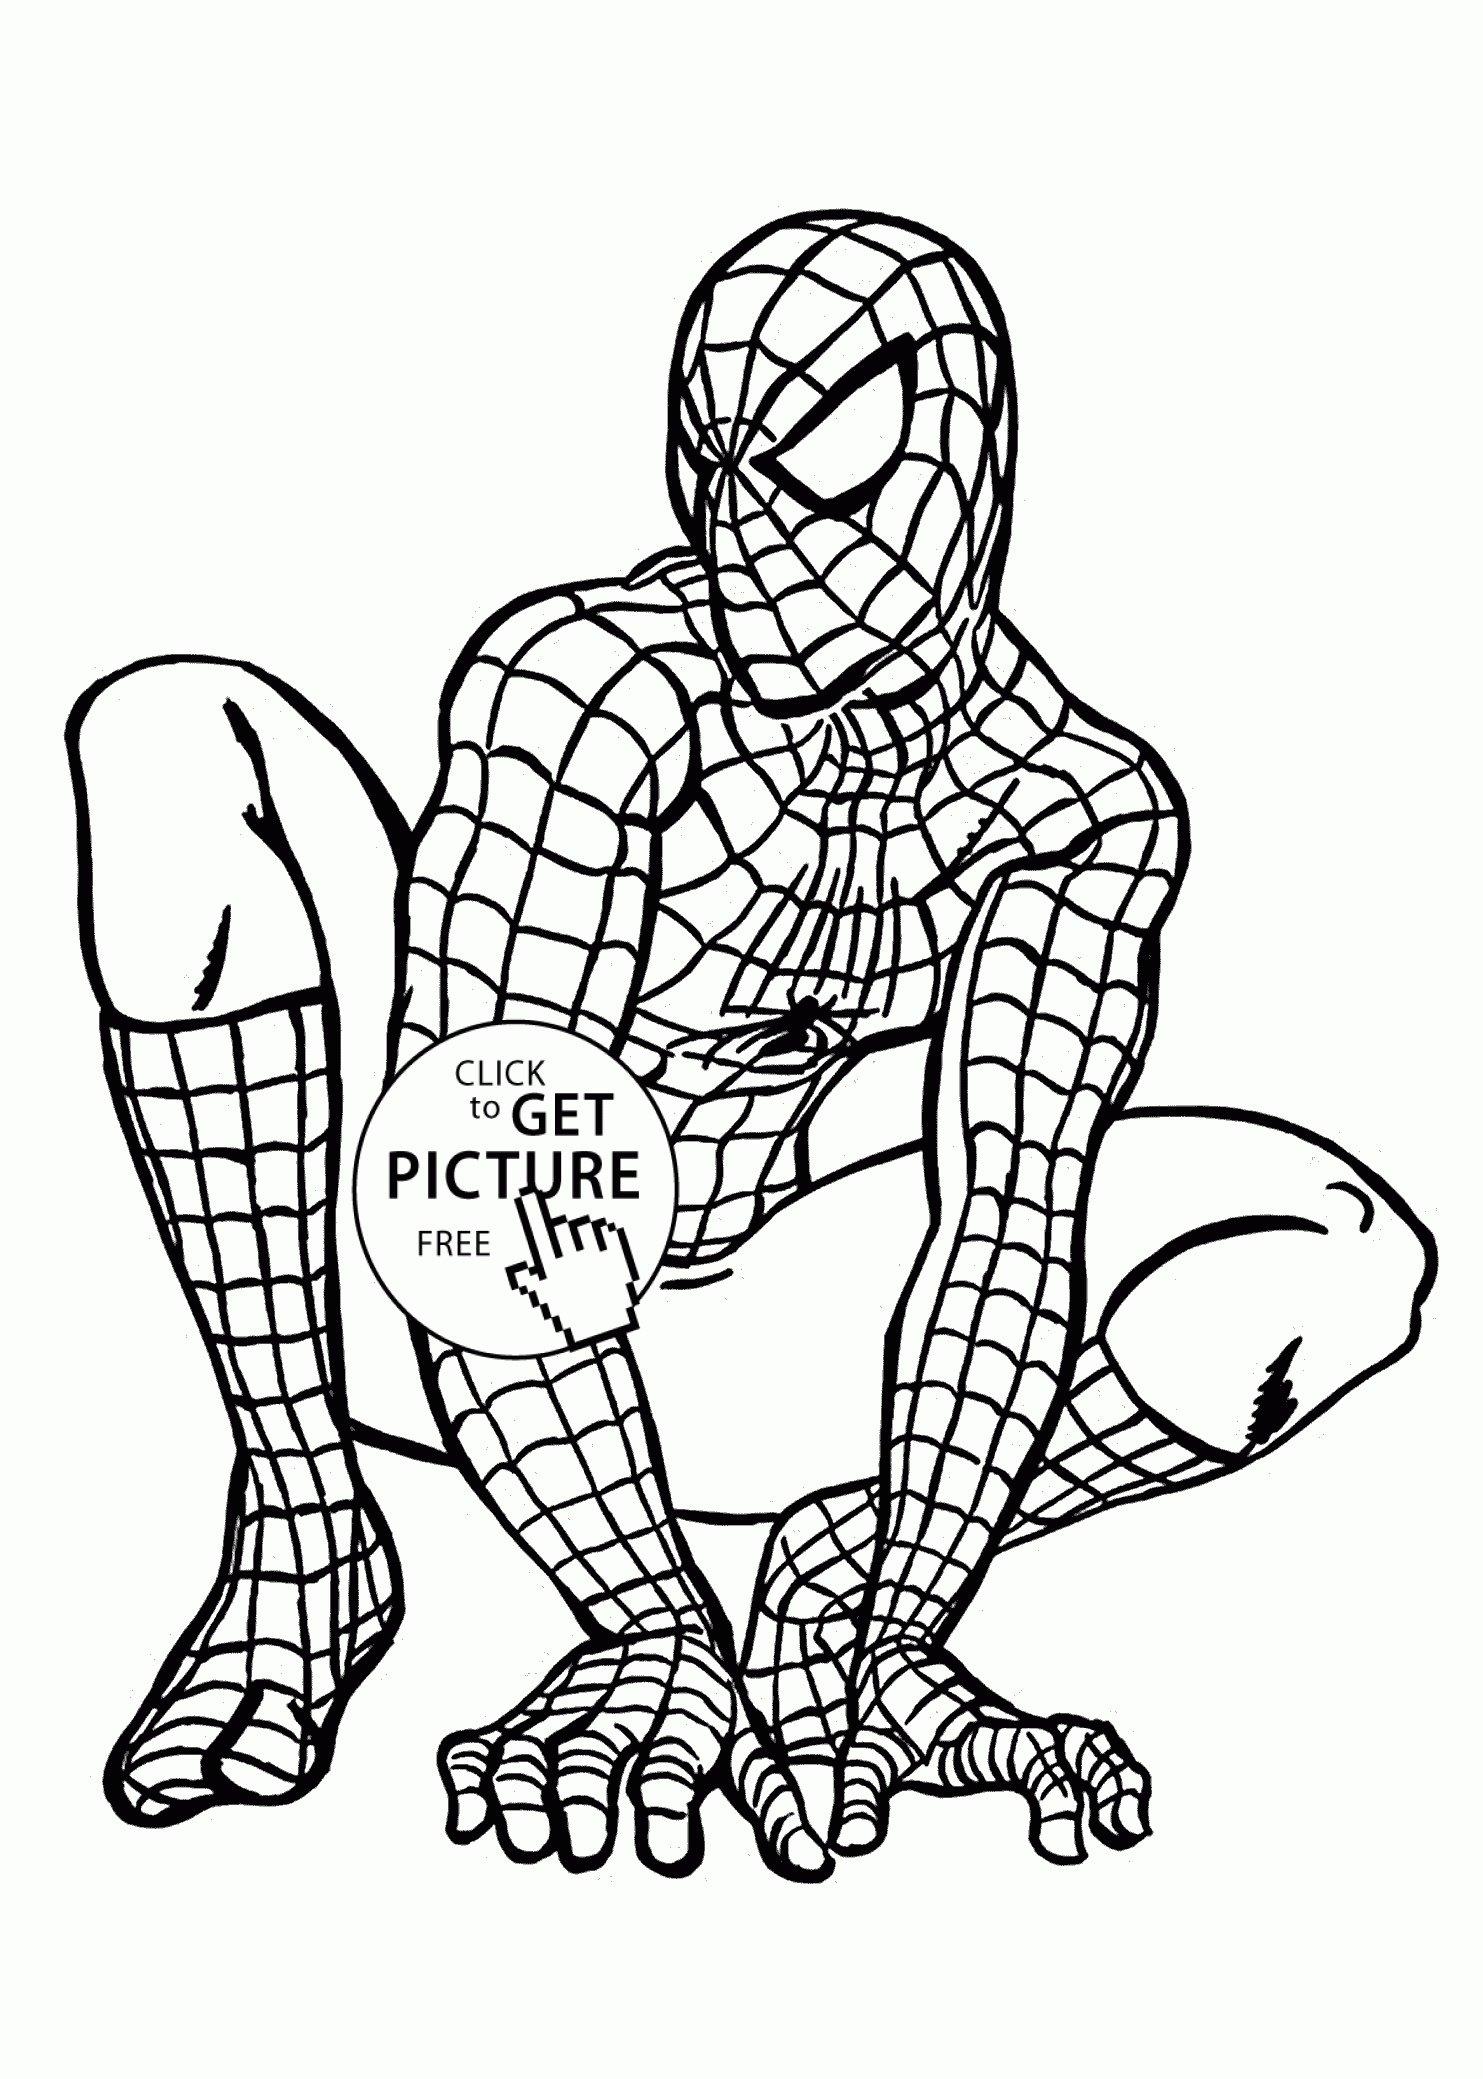 Spider Man Coloring Pages For Kids Printable Free | Coloing-4Kids